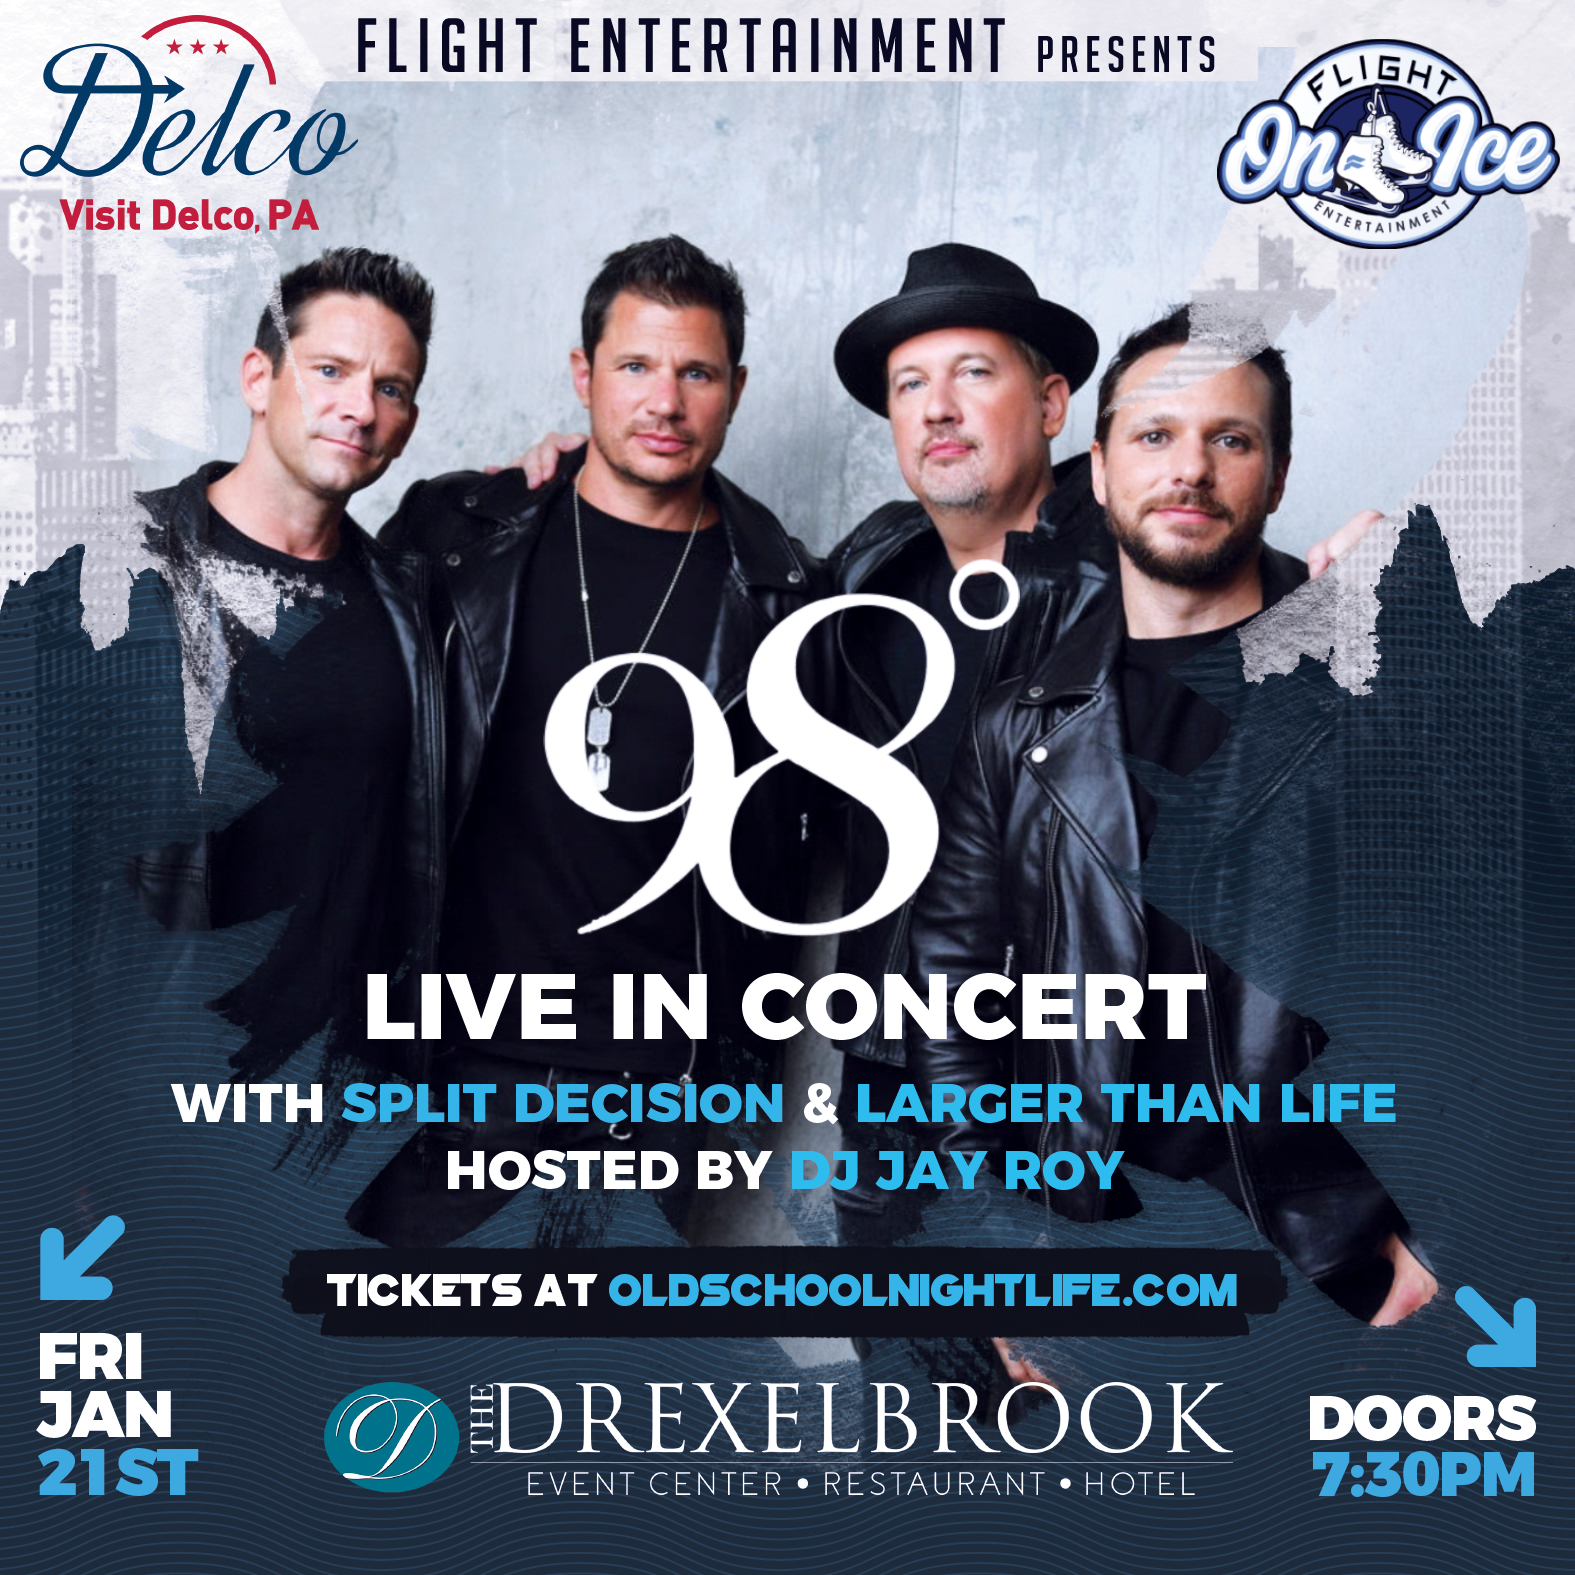 Buy Tickets to 98 Degrees Live in Concert in Drexel Hill on Jan 21